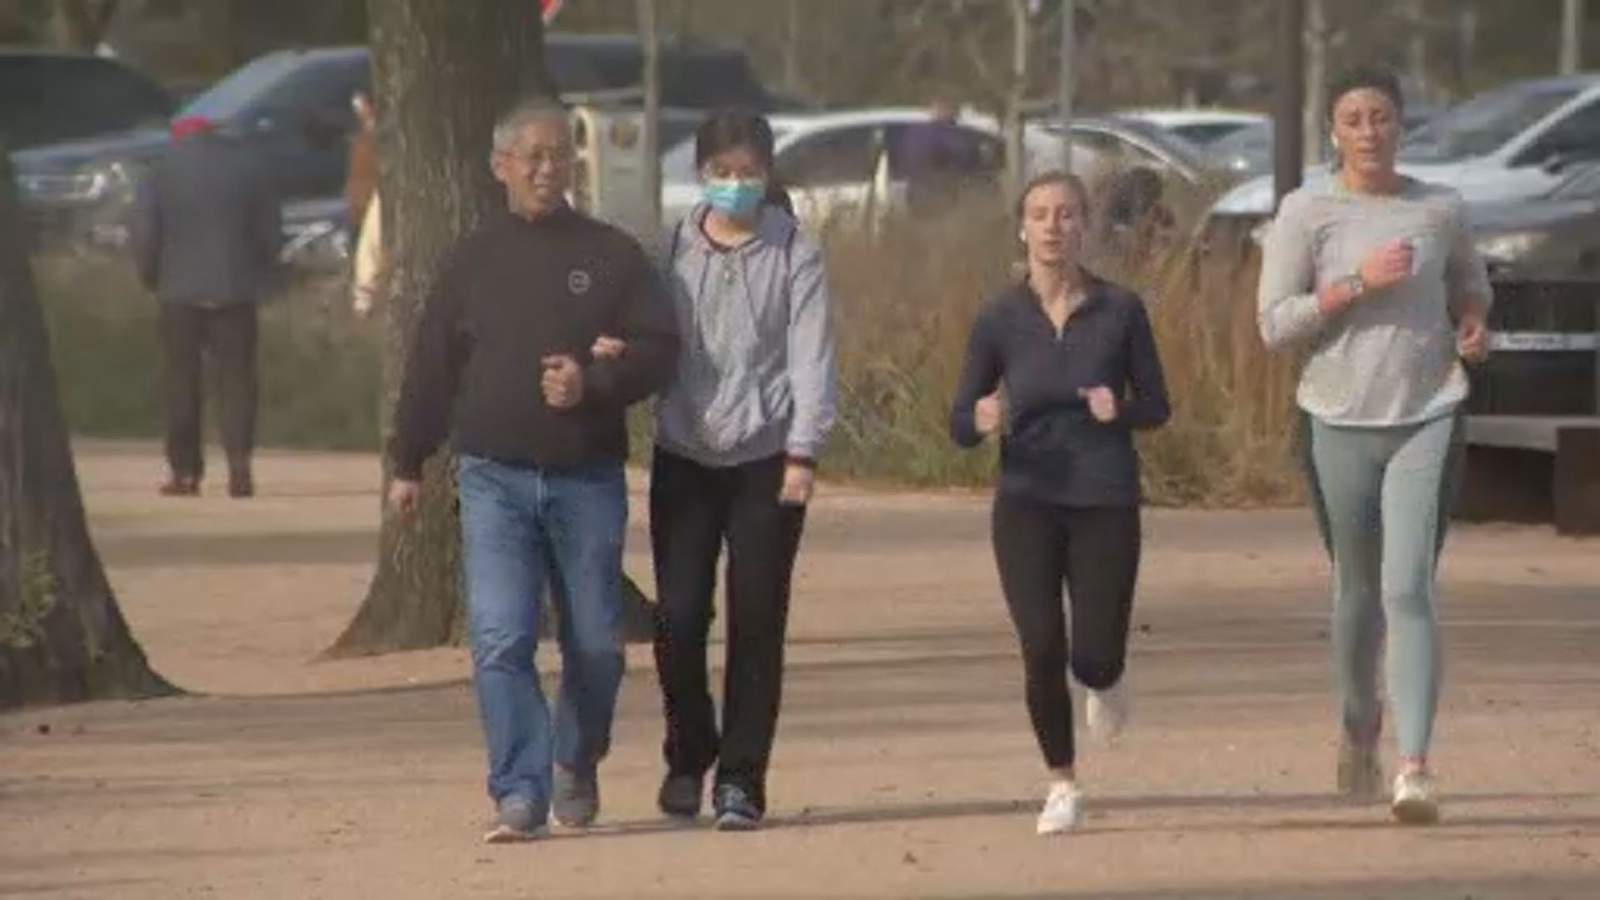 Some Houstonians focusing on health, getting in shape for 2021